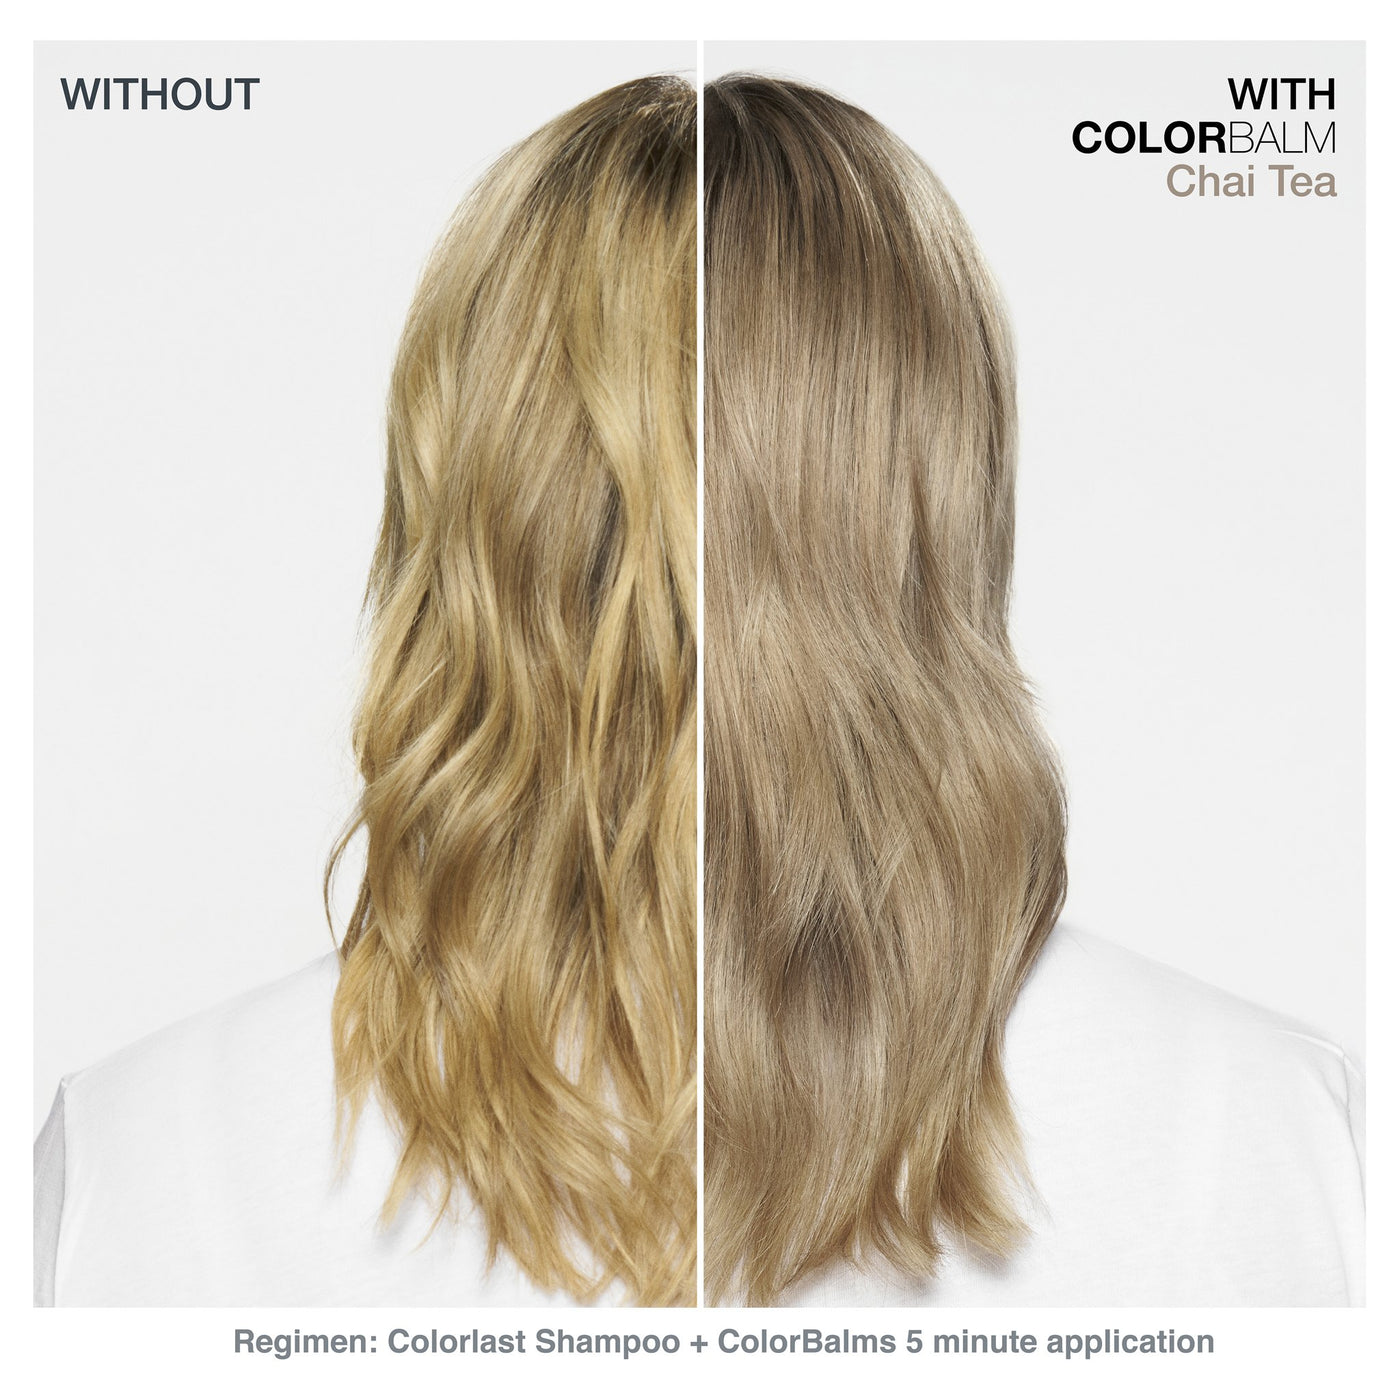 Enhances colour & conditions hair in just 5 minutes